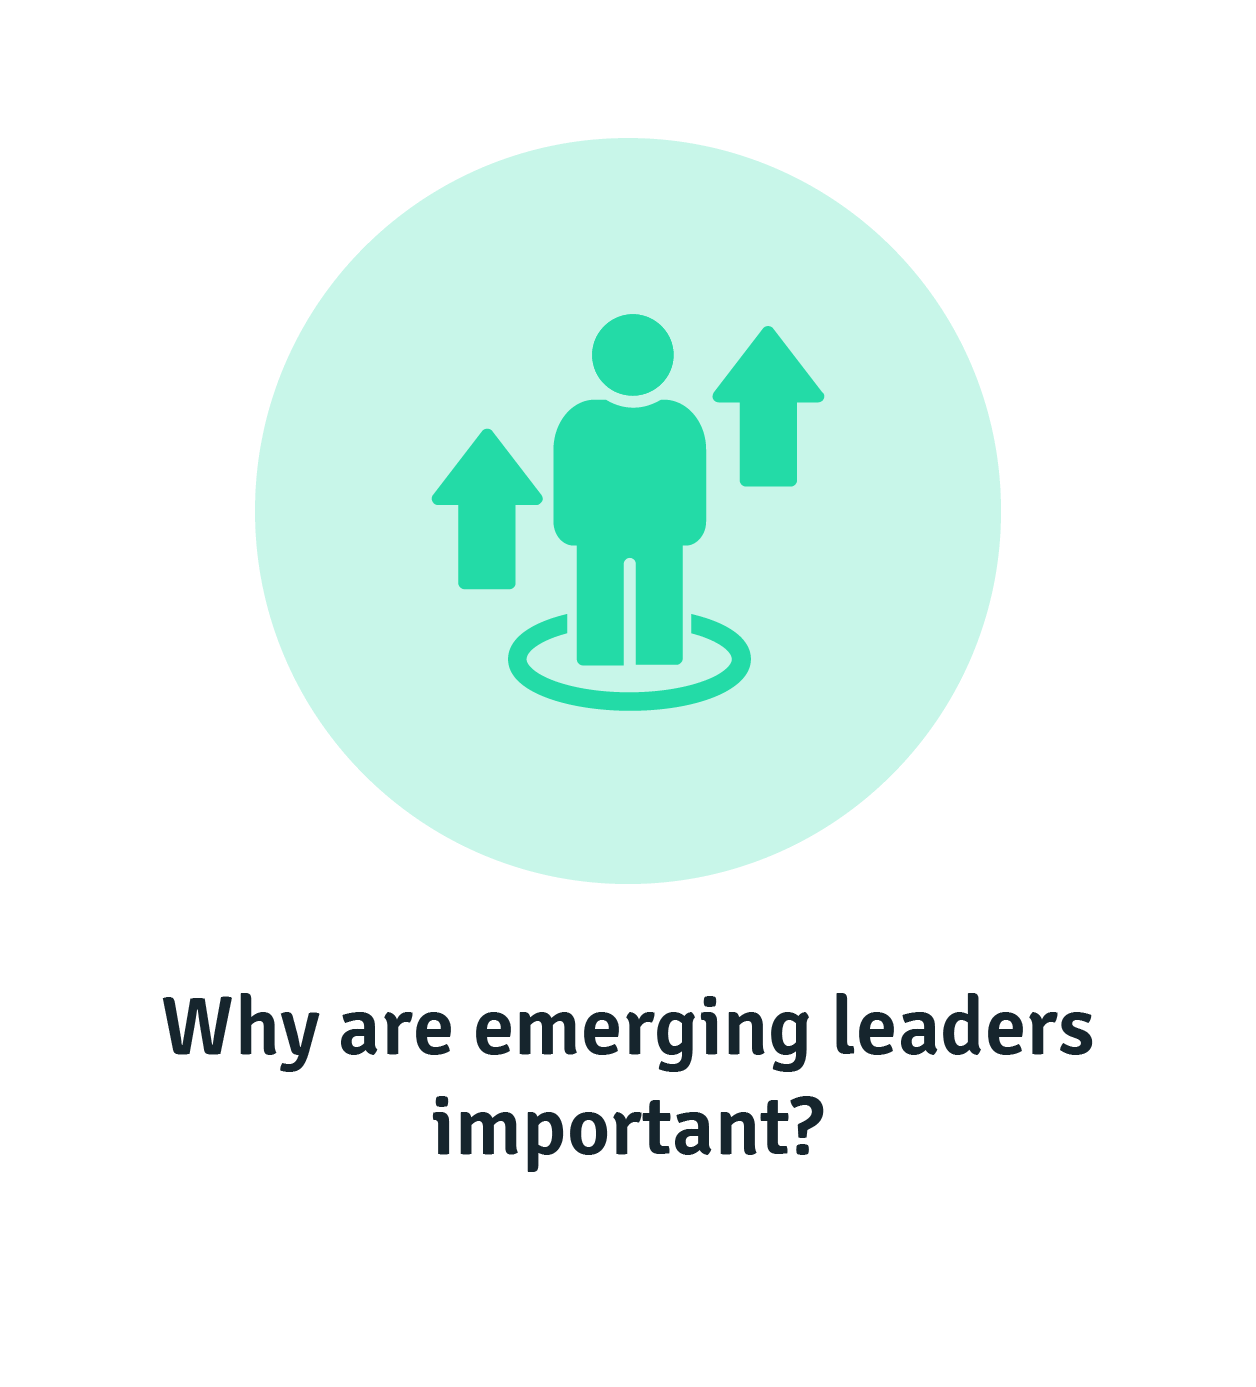 Why are emerging leaders important